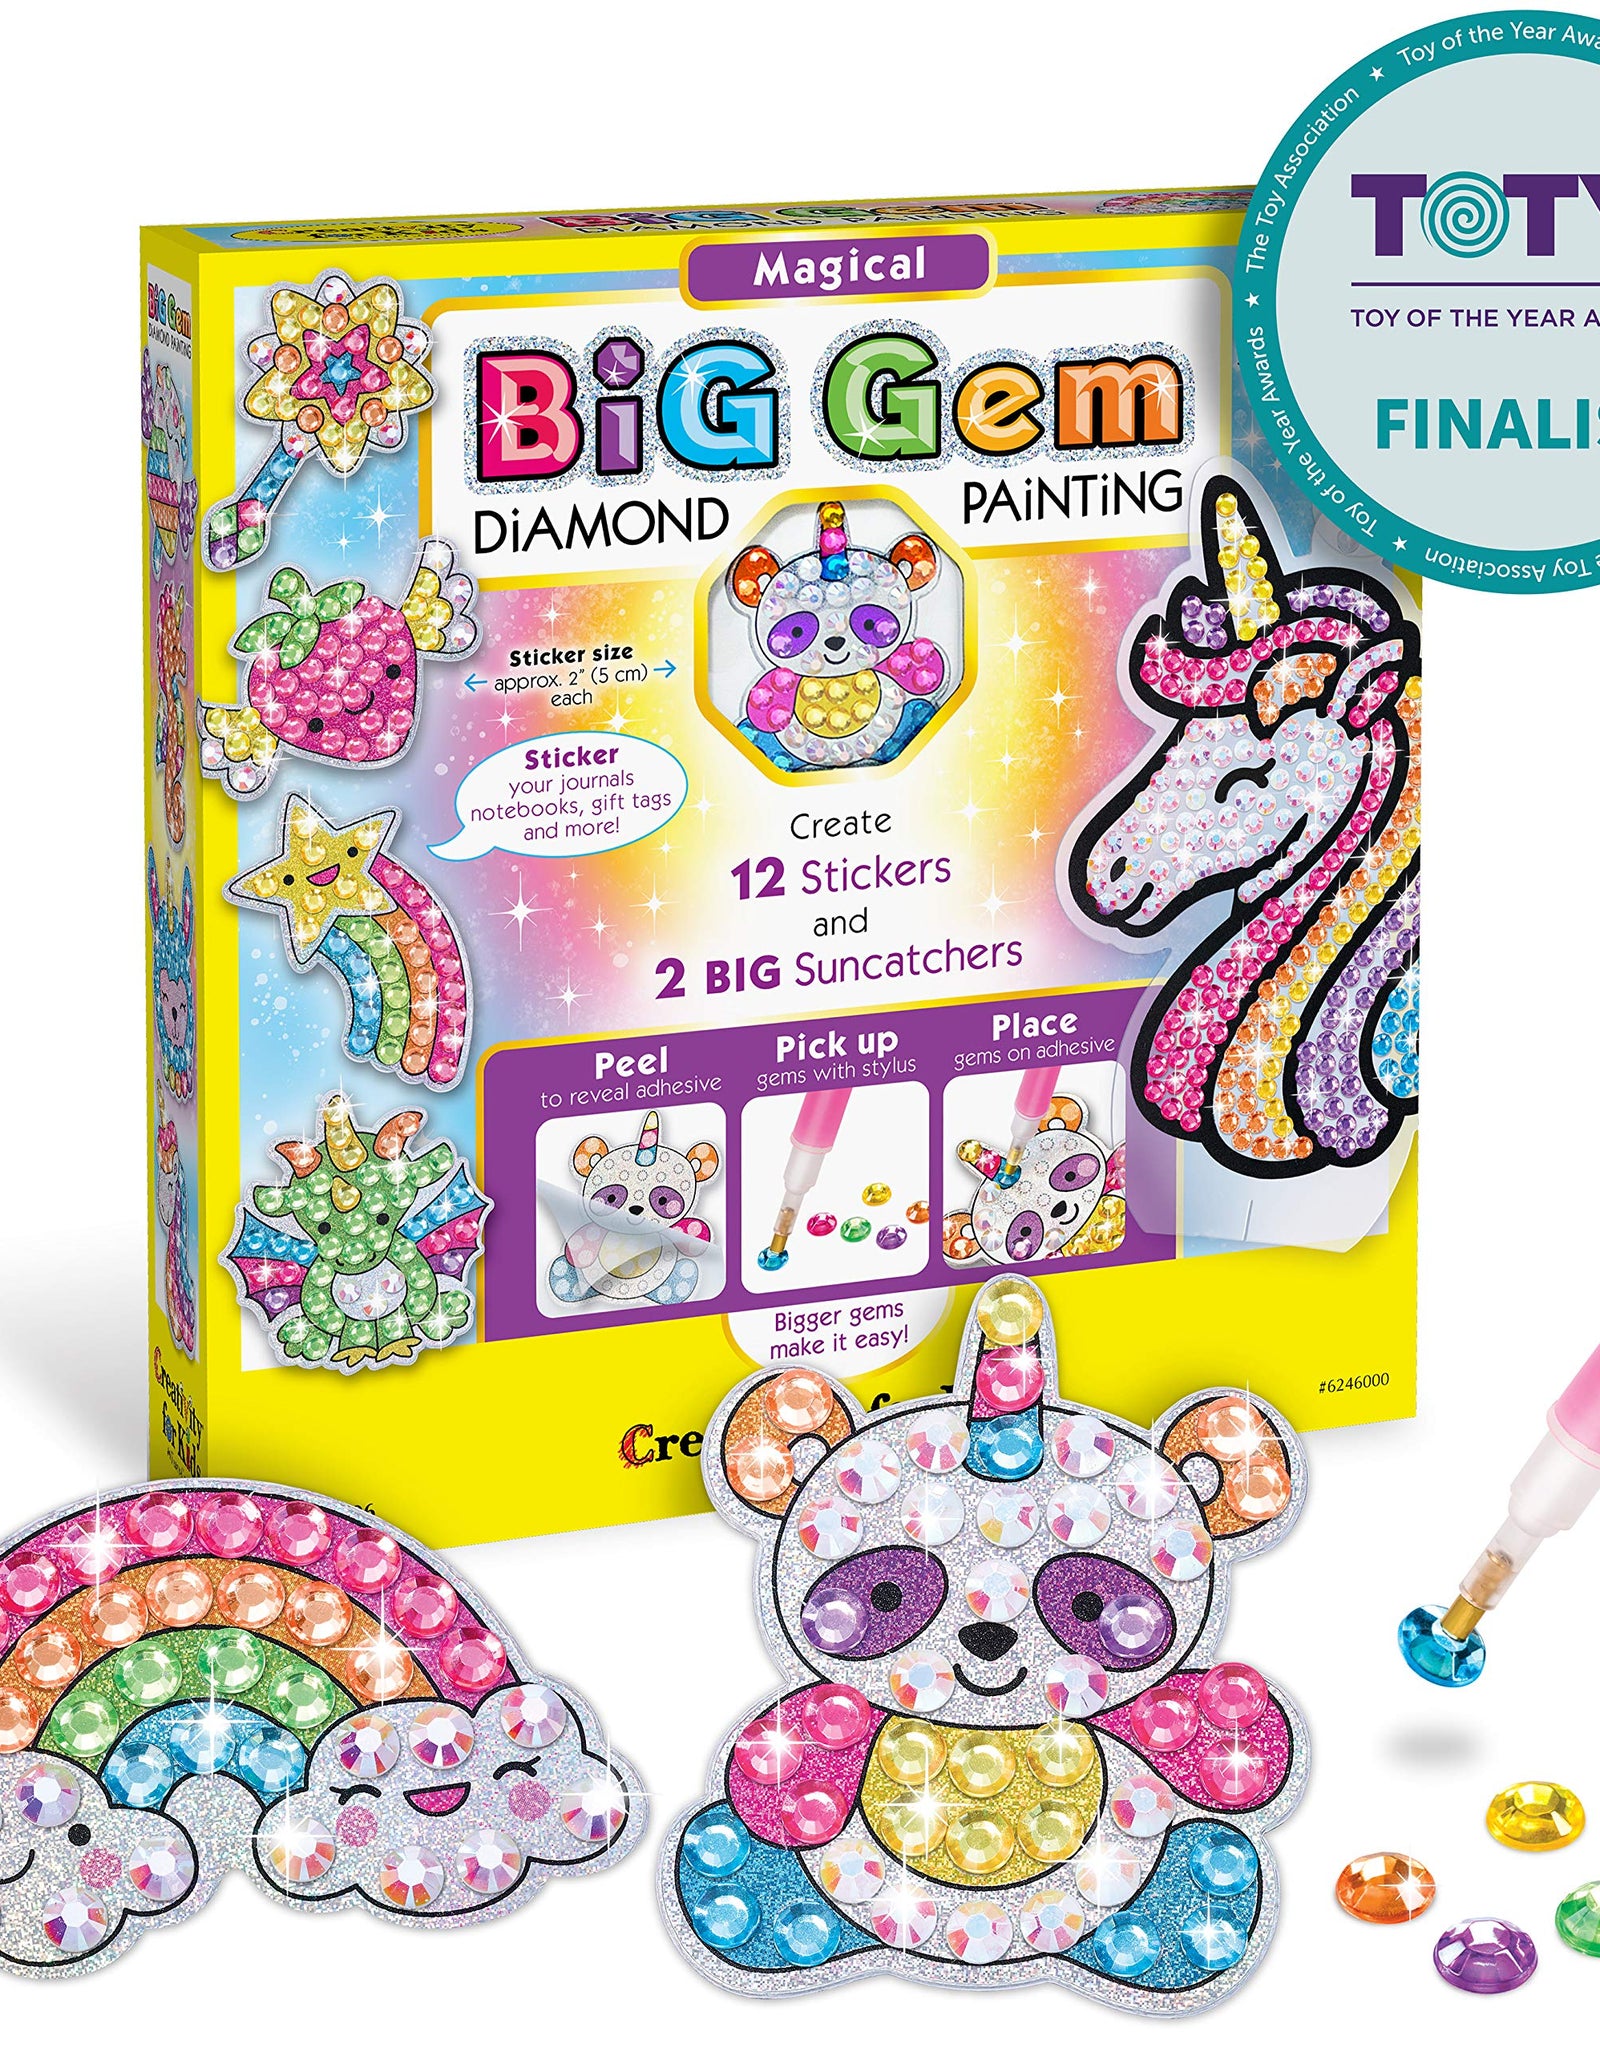 Creativity for Kids Big Gem Diamond Painting Kit - Create Your Own Magical Stickers and Suncatchers - Diamond Art for Kids